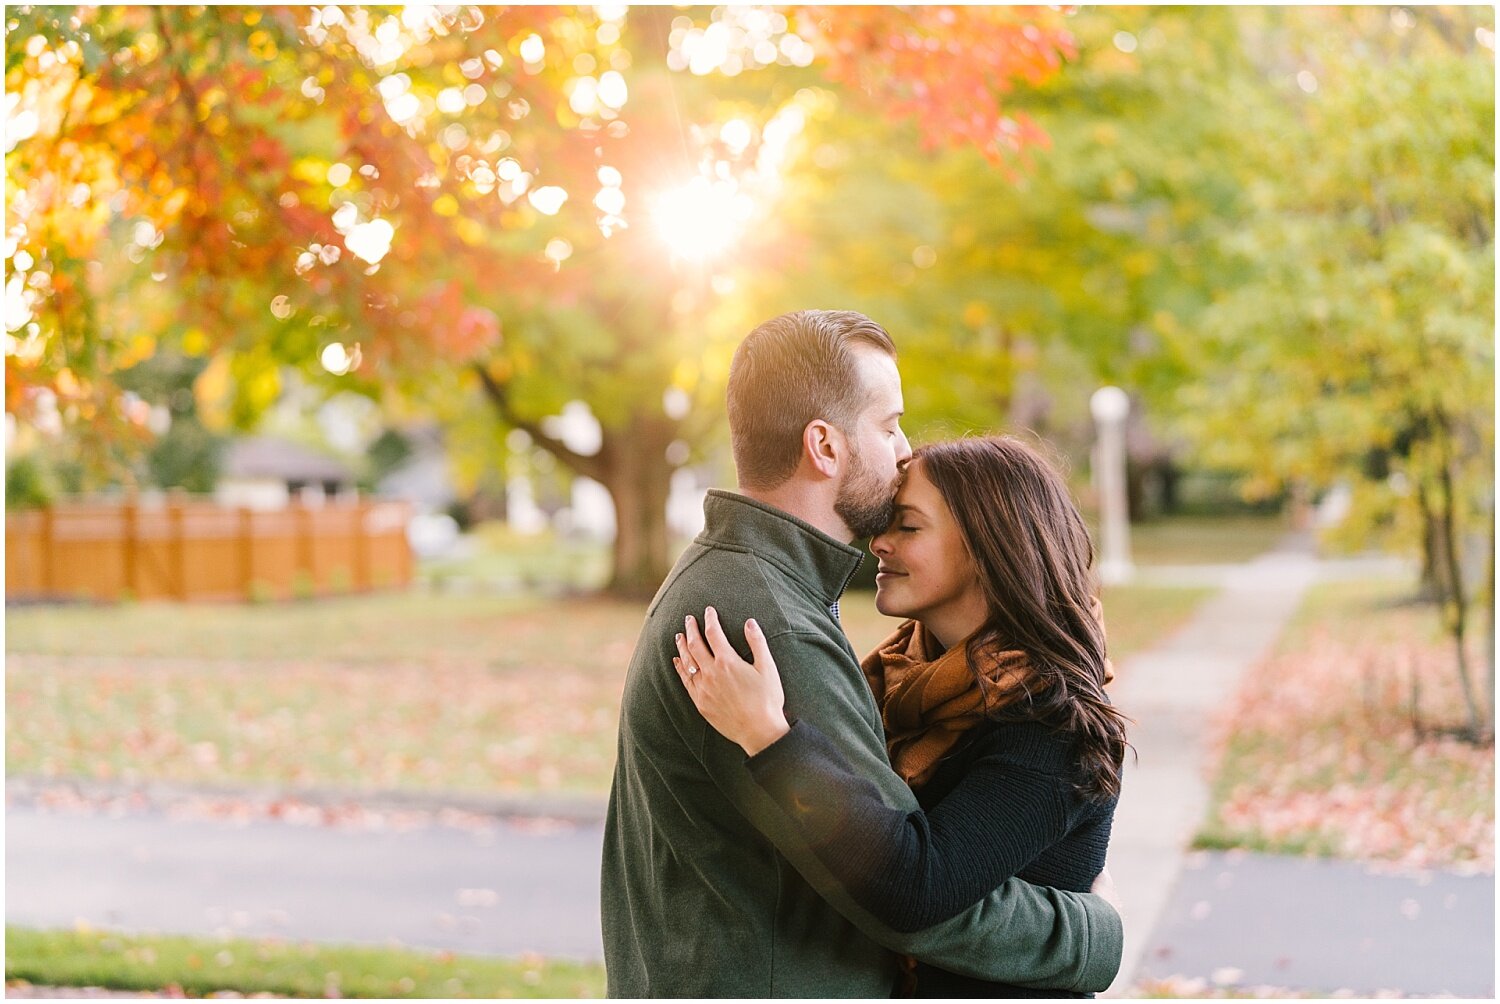 living+roots+wine+engagement+session+rochester+ny+wedding+photographer (29).jpg